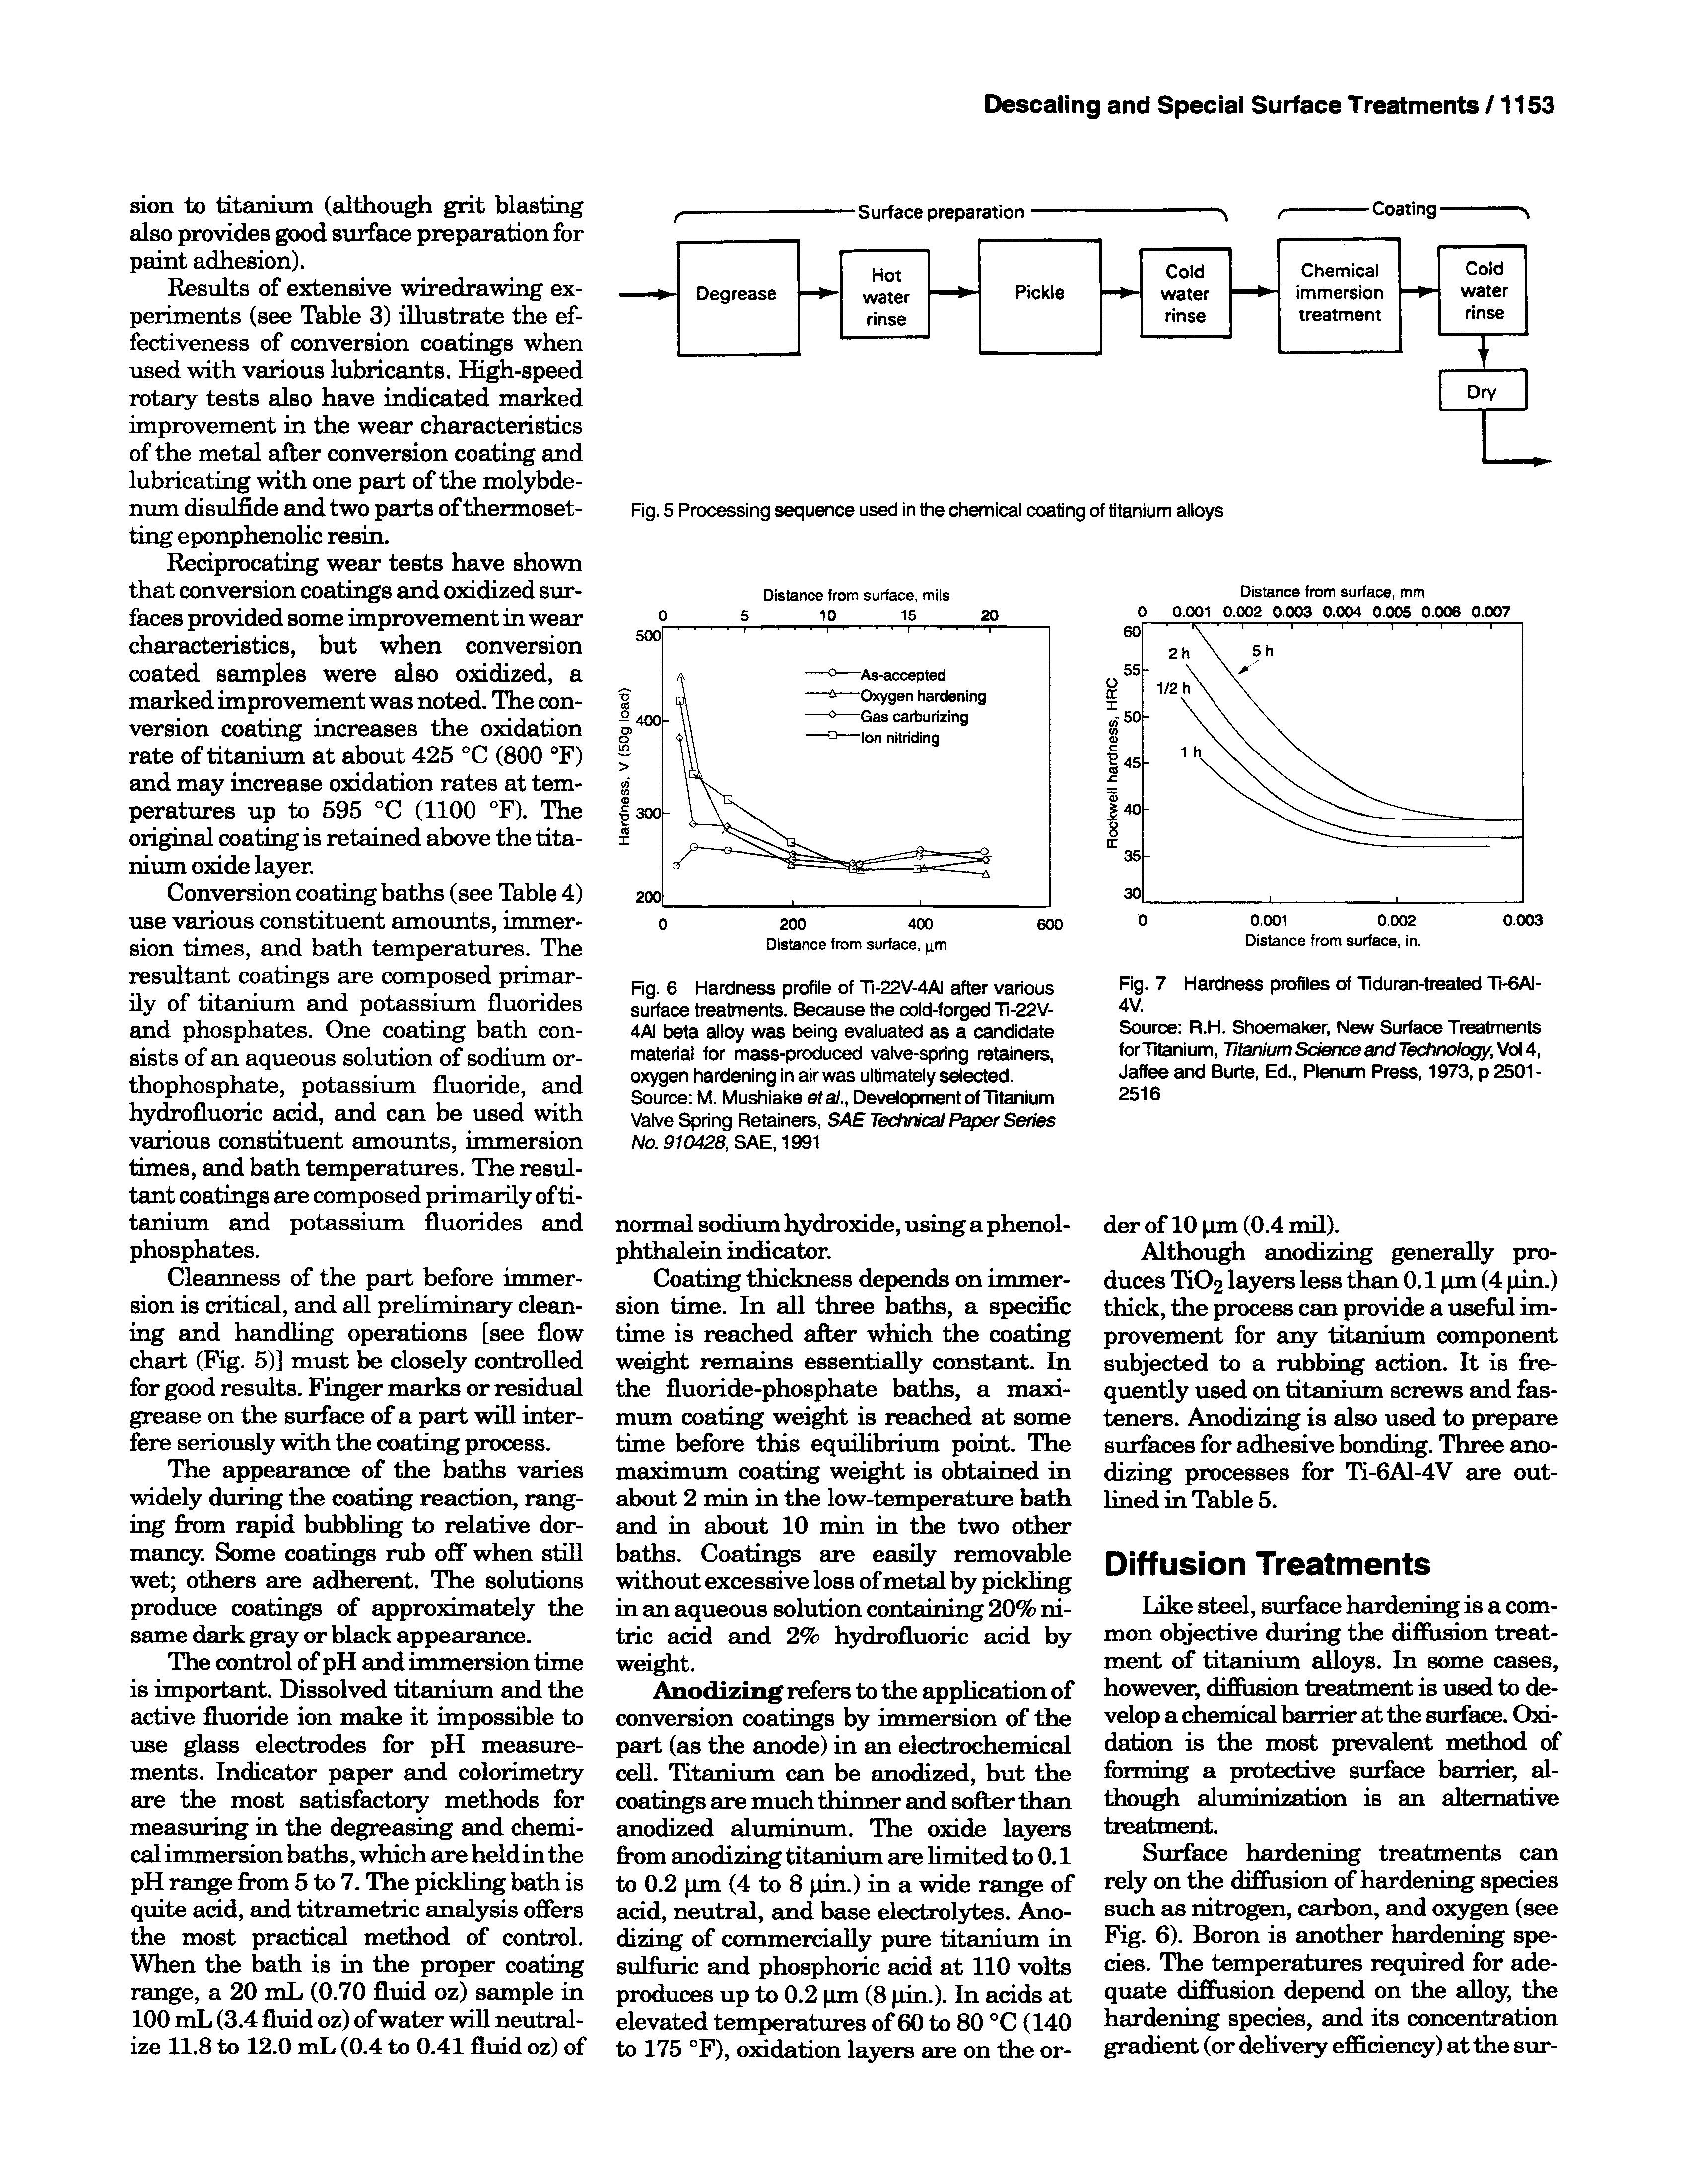 Fig. 6 Hardness profile of Tl-22V-4AI after various surface treatments. Because the cold-forged TI-22V-4AI beta alloy was being evaluated as a candidate material for mass-produced valve-spring retainers, oxygen hardening in air was ultimately selected. Source M. Mushiake etal., Development of Titanium Valve Spring Retainers, SAE Technicai Paper Series No. 910428, SAE, 1991...